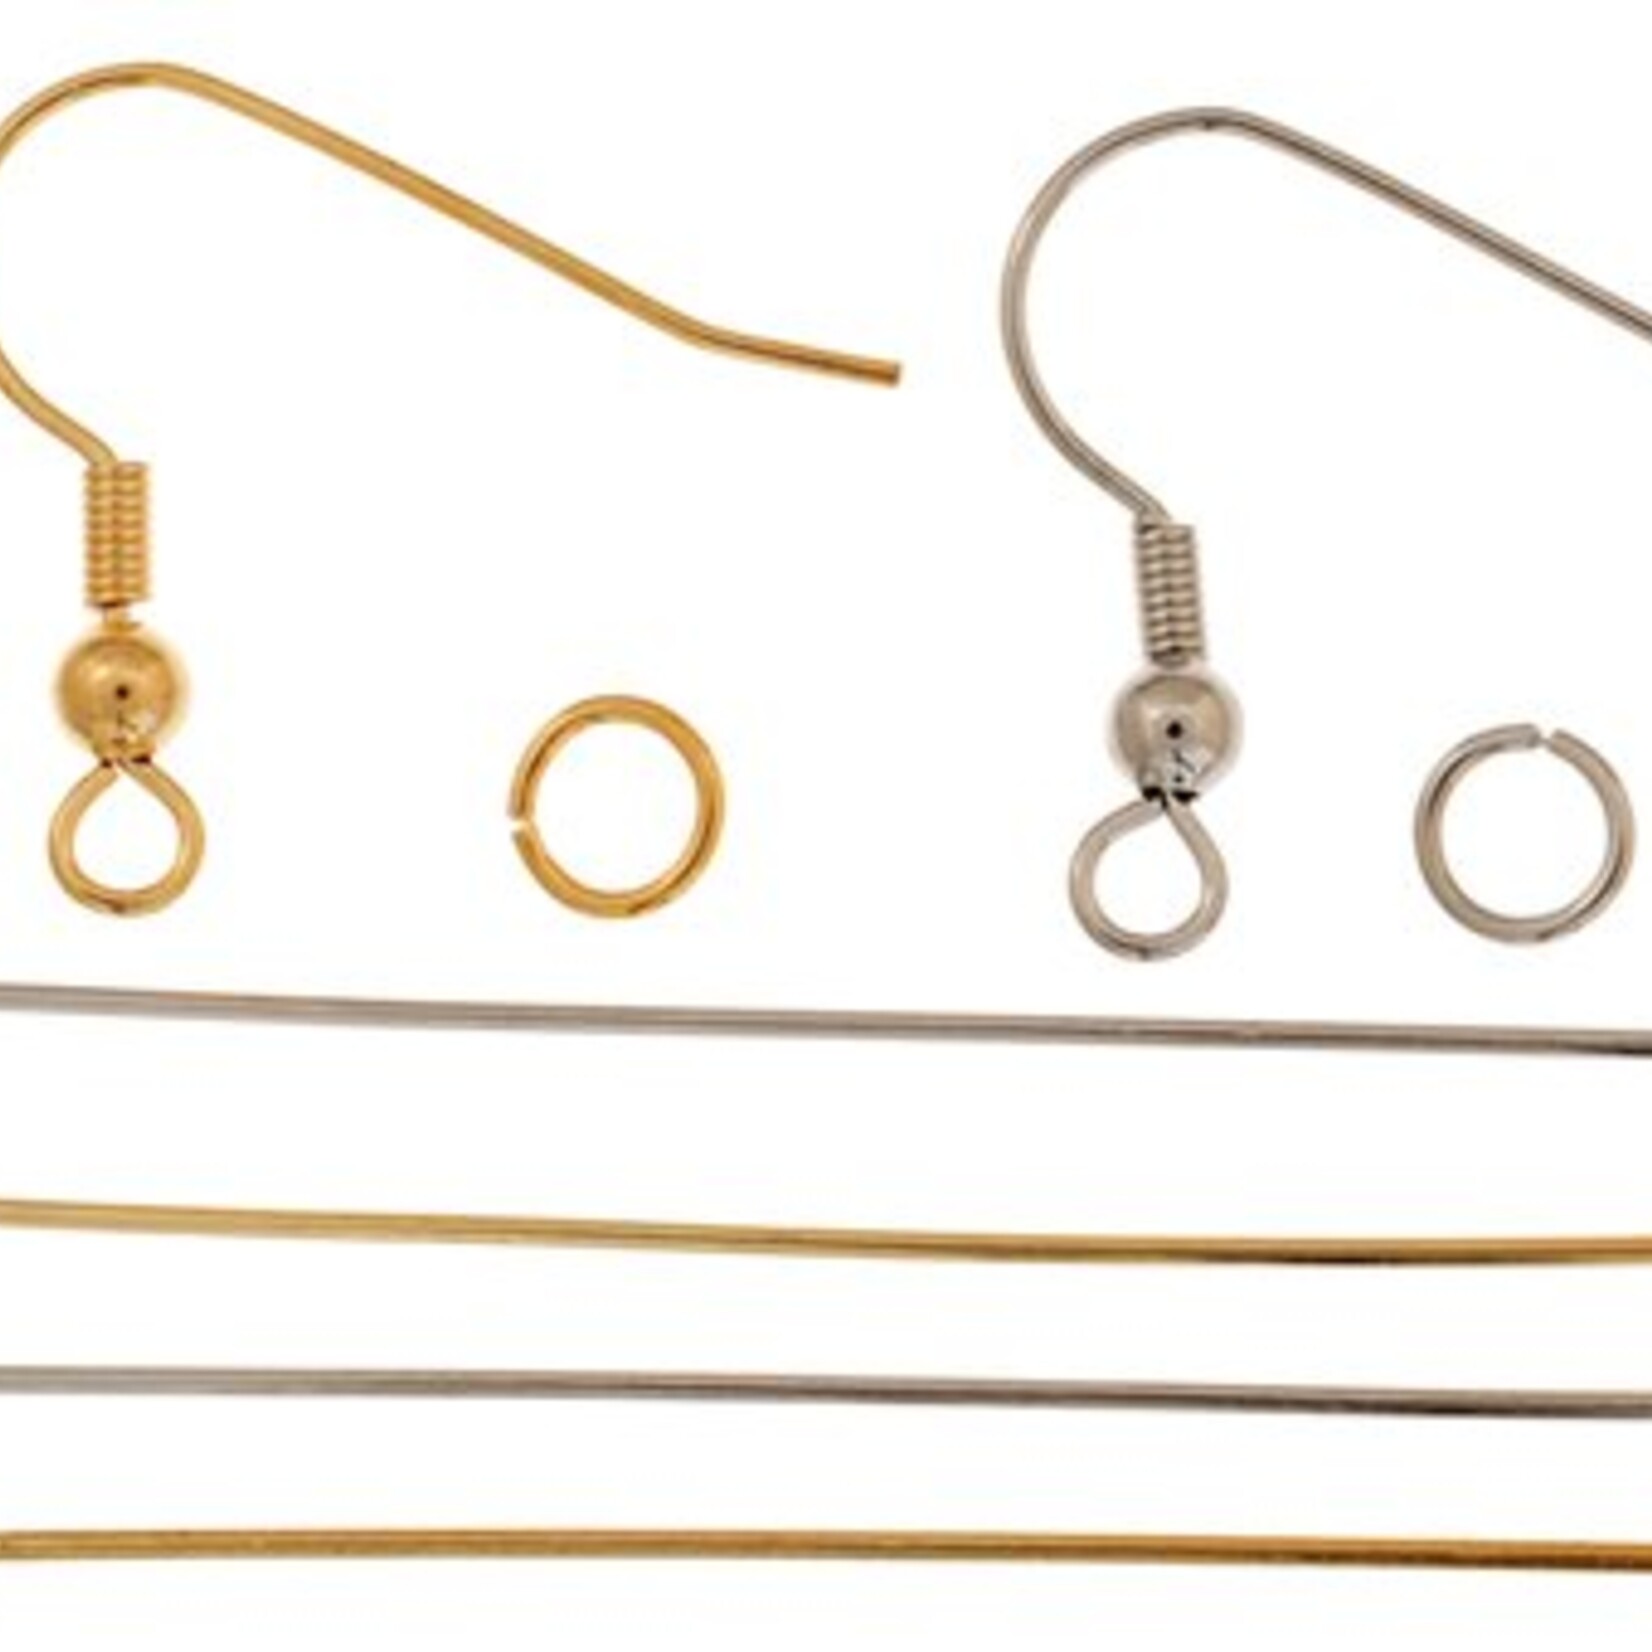 Fish Hooks (Brass) W/ Ball And Spring (100Pcs) Gold 18Mm Fish Hook